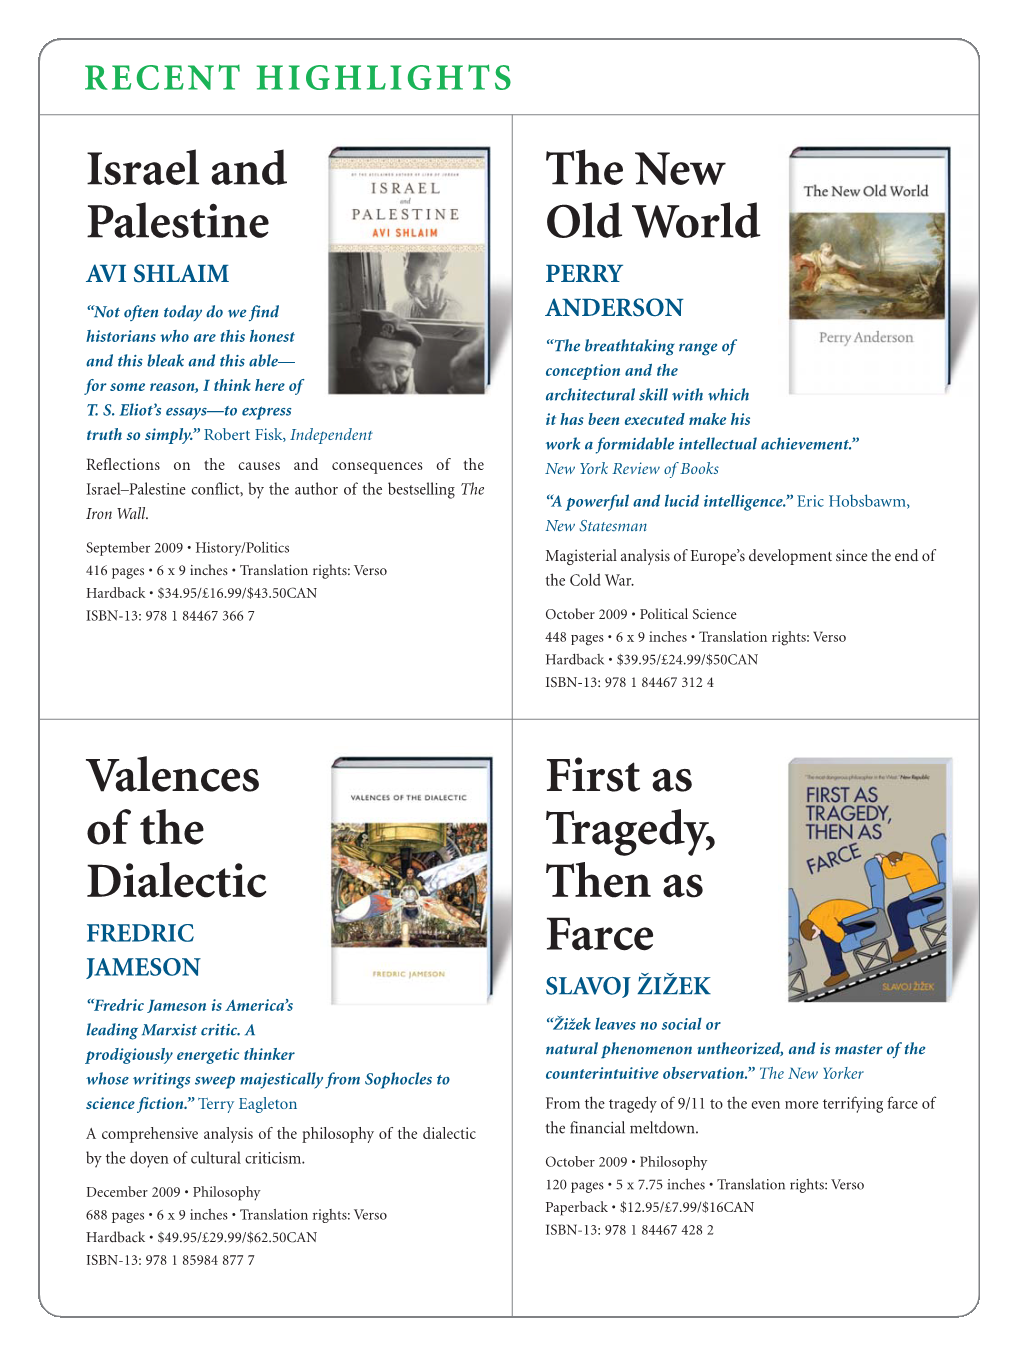 Israel and Palestine the New Old World Valences of the Dialectic First